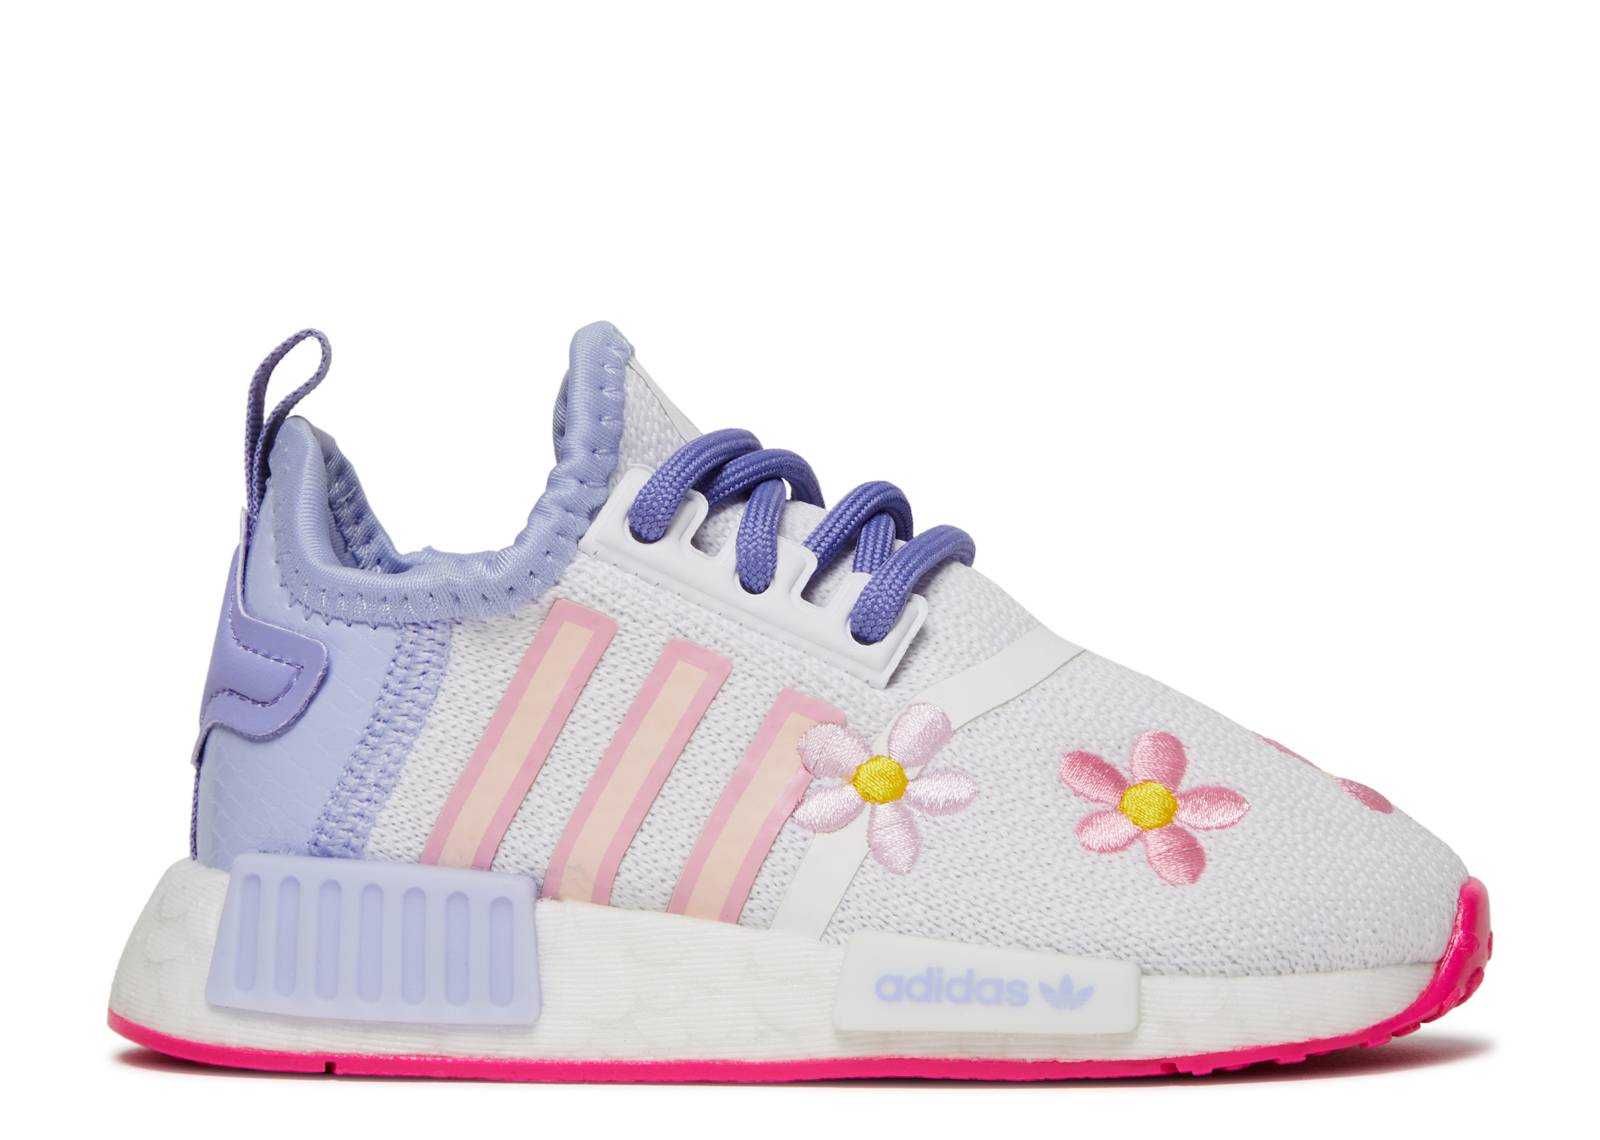 Monsters Inc. x NMD_R1 Infant 'Boo'